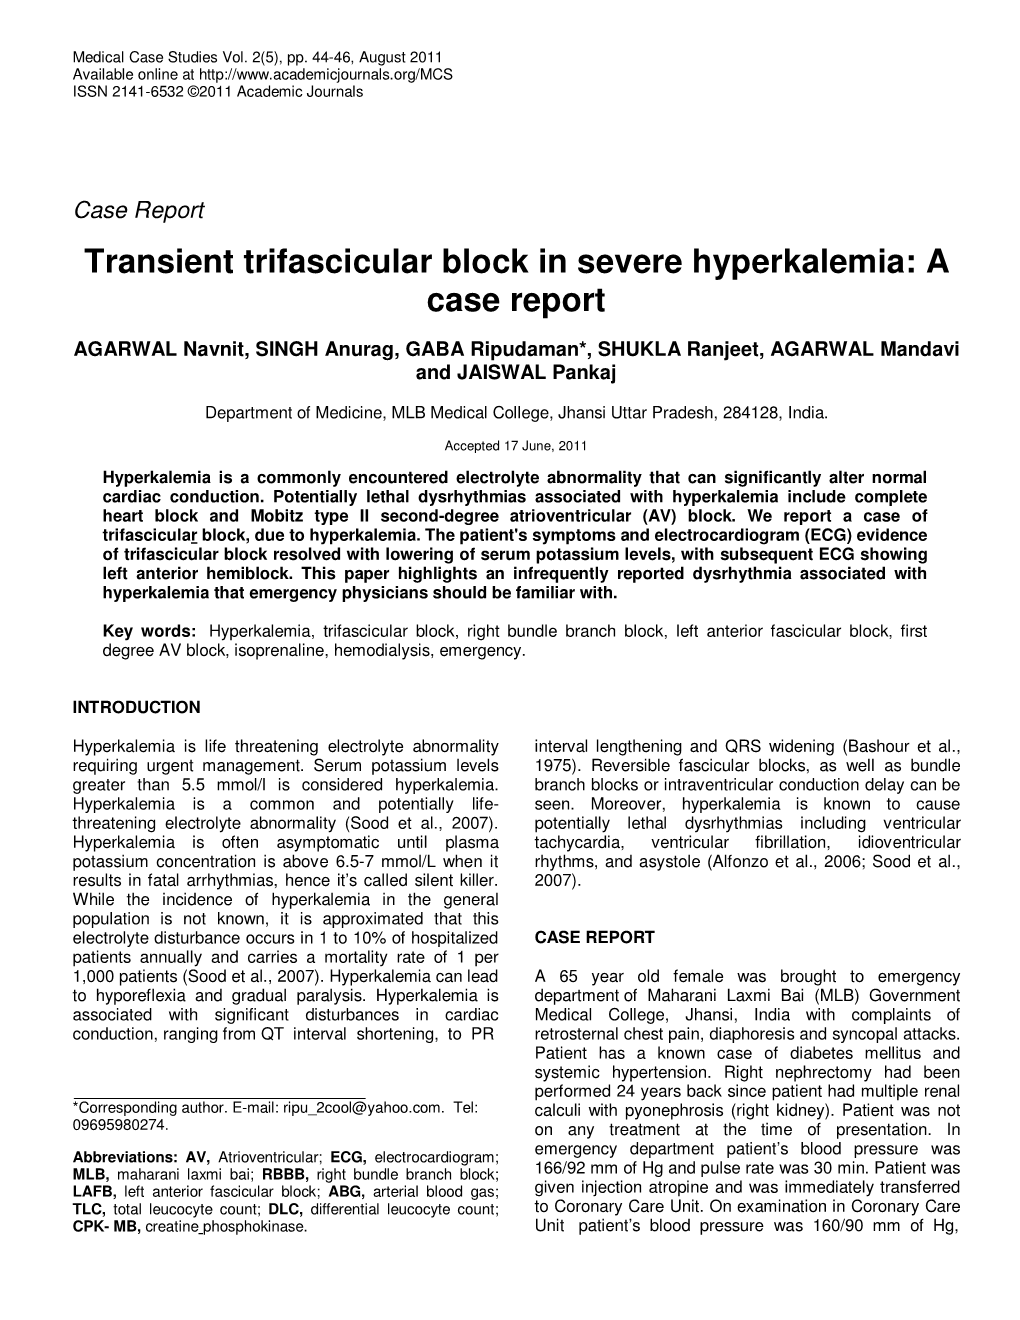 Transient Trifascicular Block in Severe Hyperkalemia: a Case Report